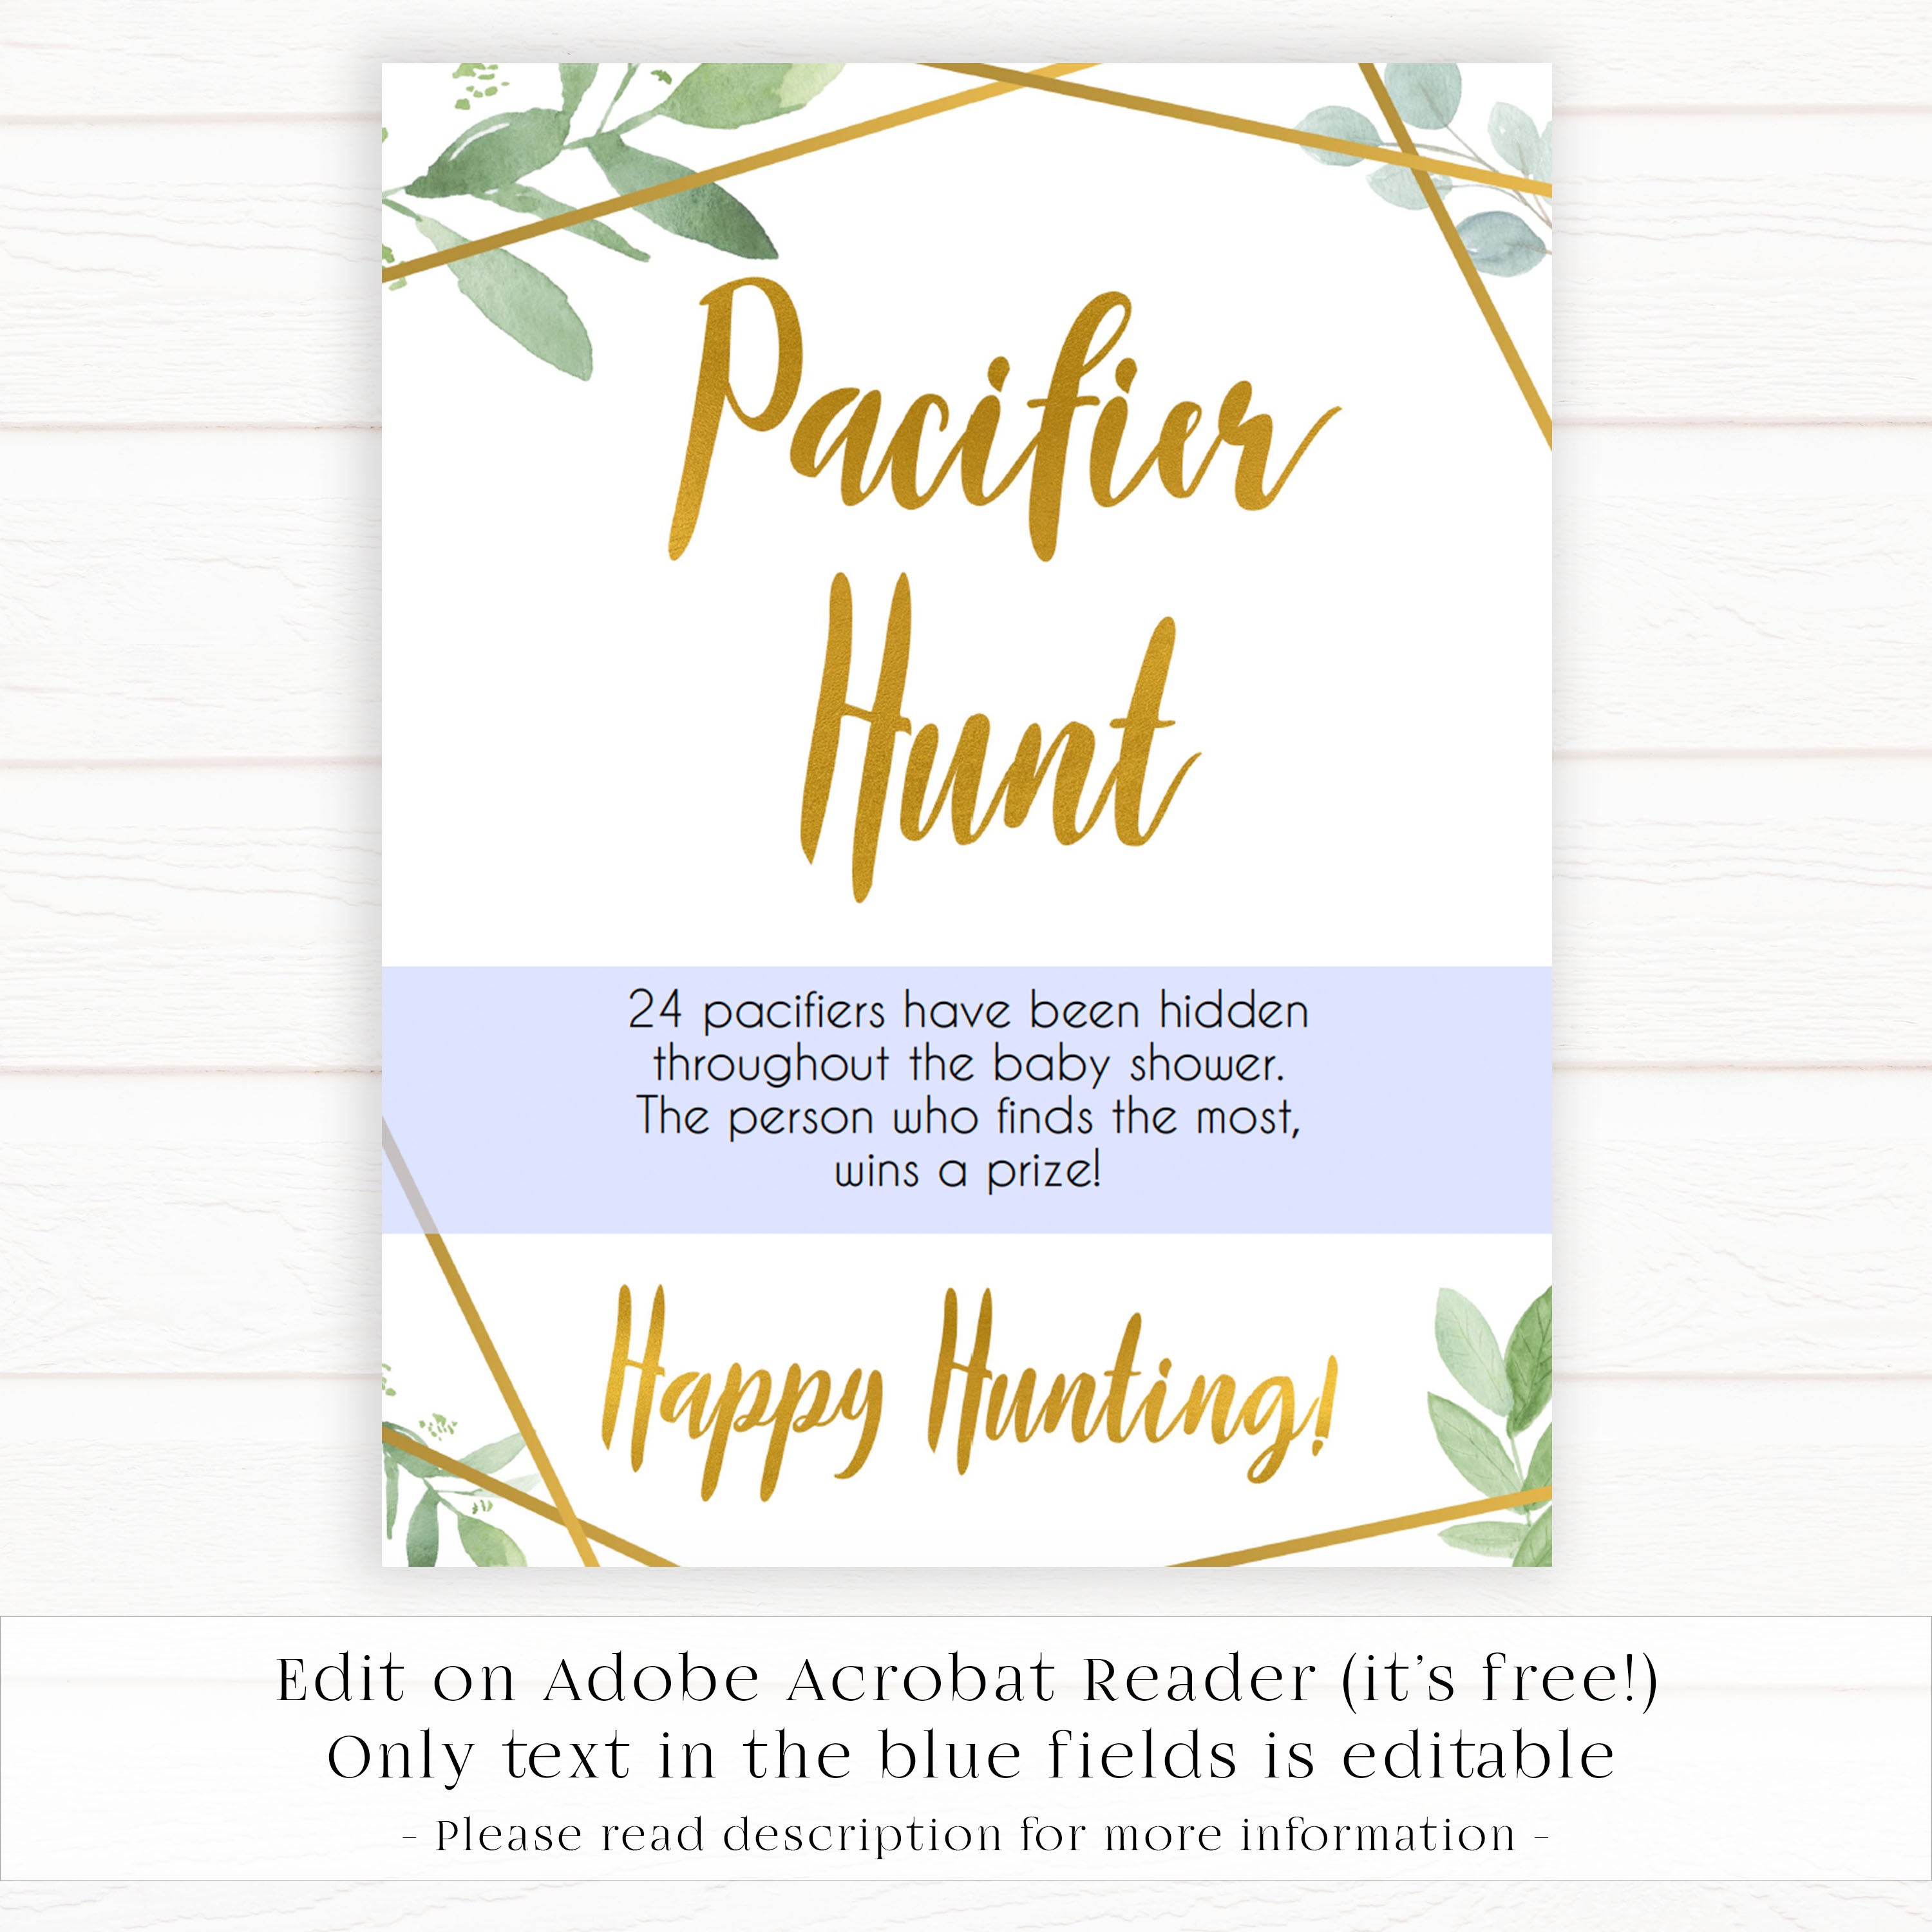 pacifier hunt game, Printable baby shower games, geometric fun baby games, baby shower games, fun baby shower ideas, top baby shower ideas, gold baby shower, blue baby shower ideas